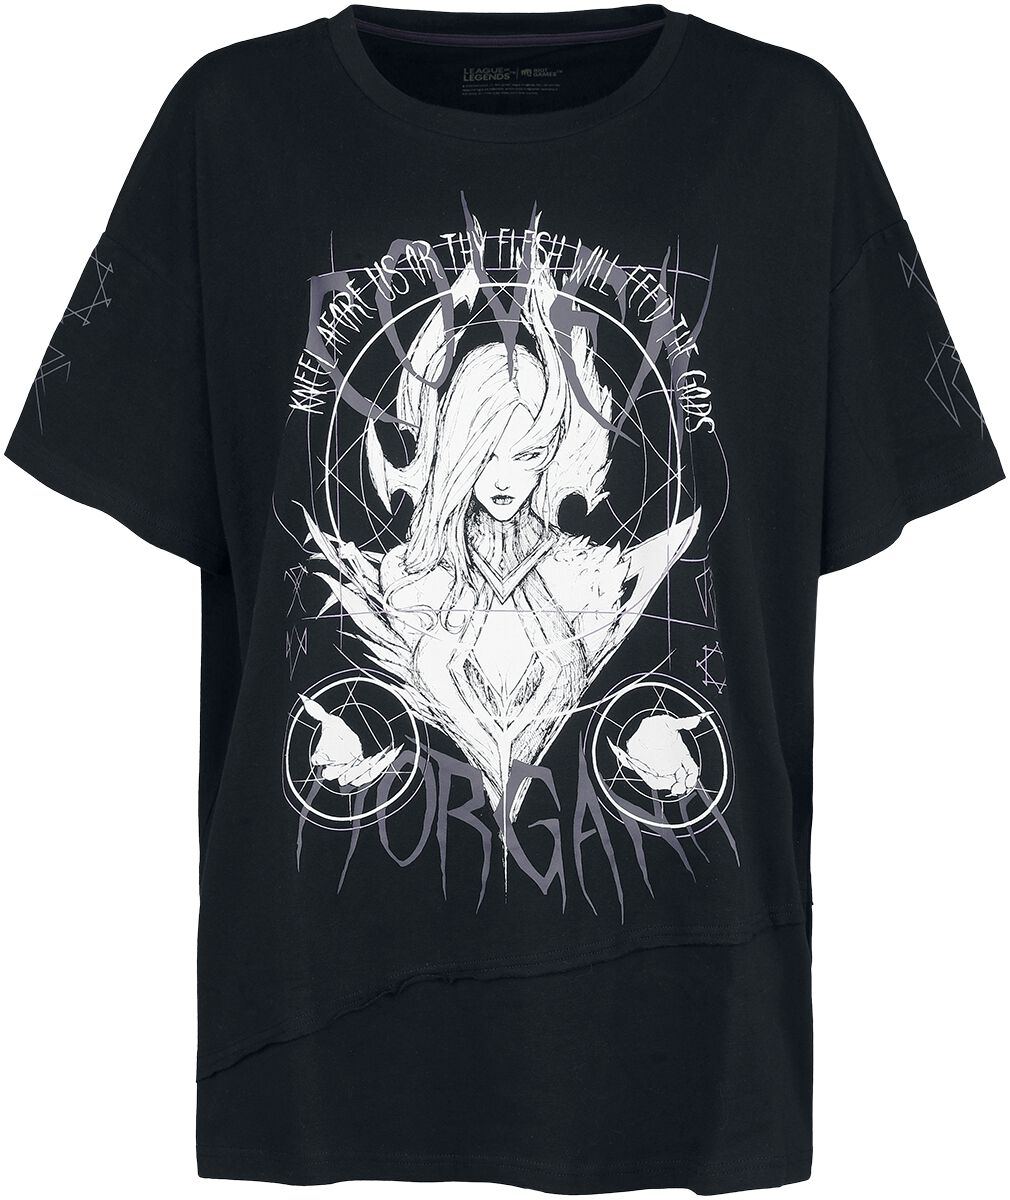 Image of T-Shirt Gaming di League of Legends - Arcane - Coven - Morgana - S a XXL - Donna - nero